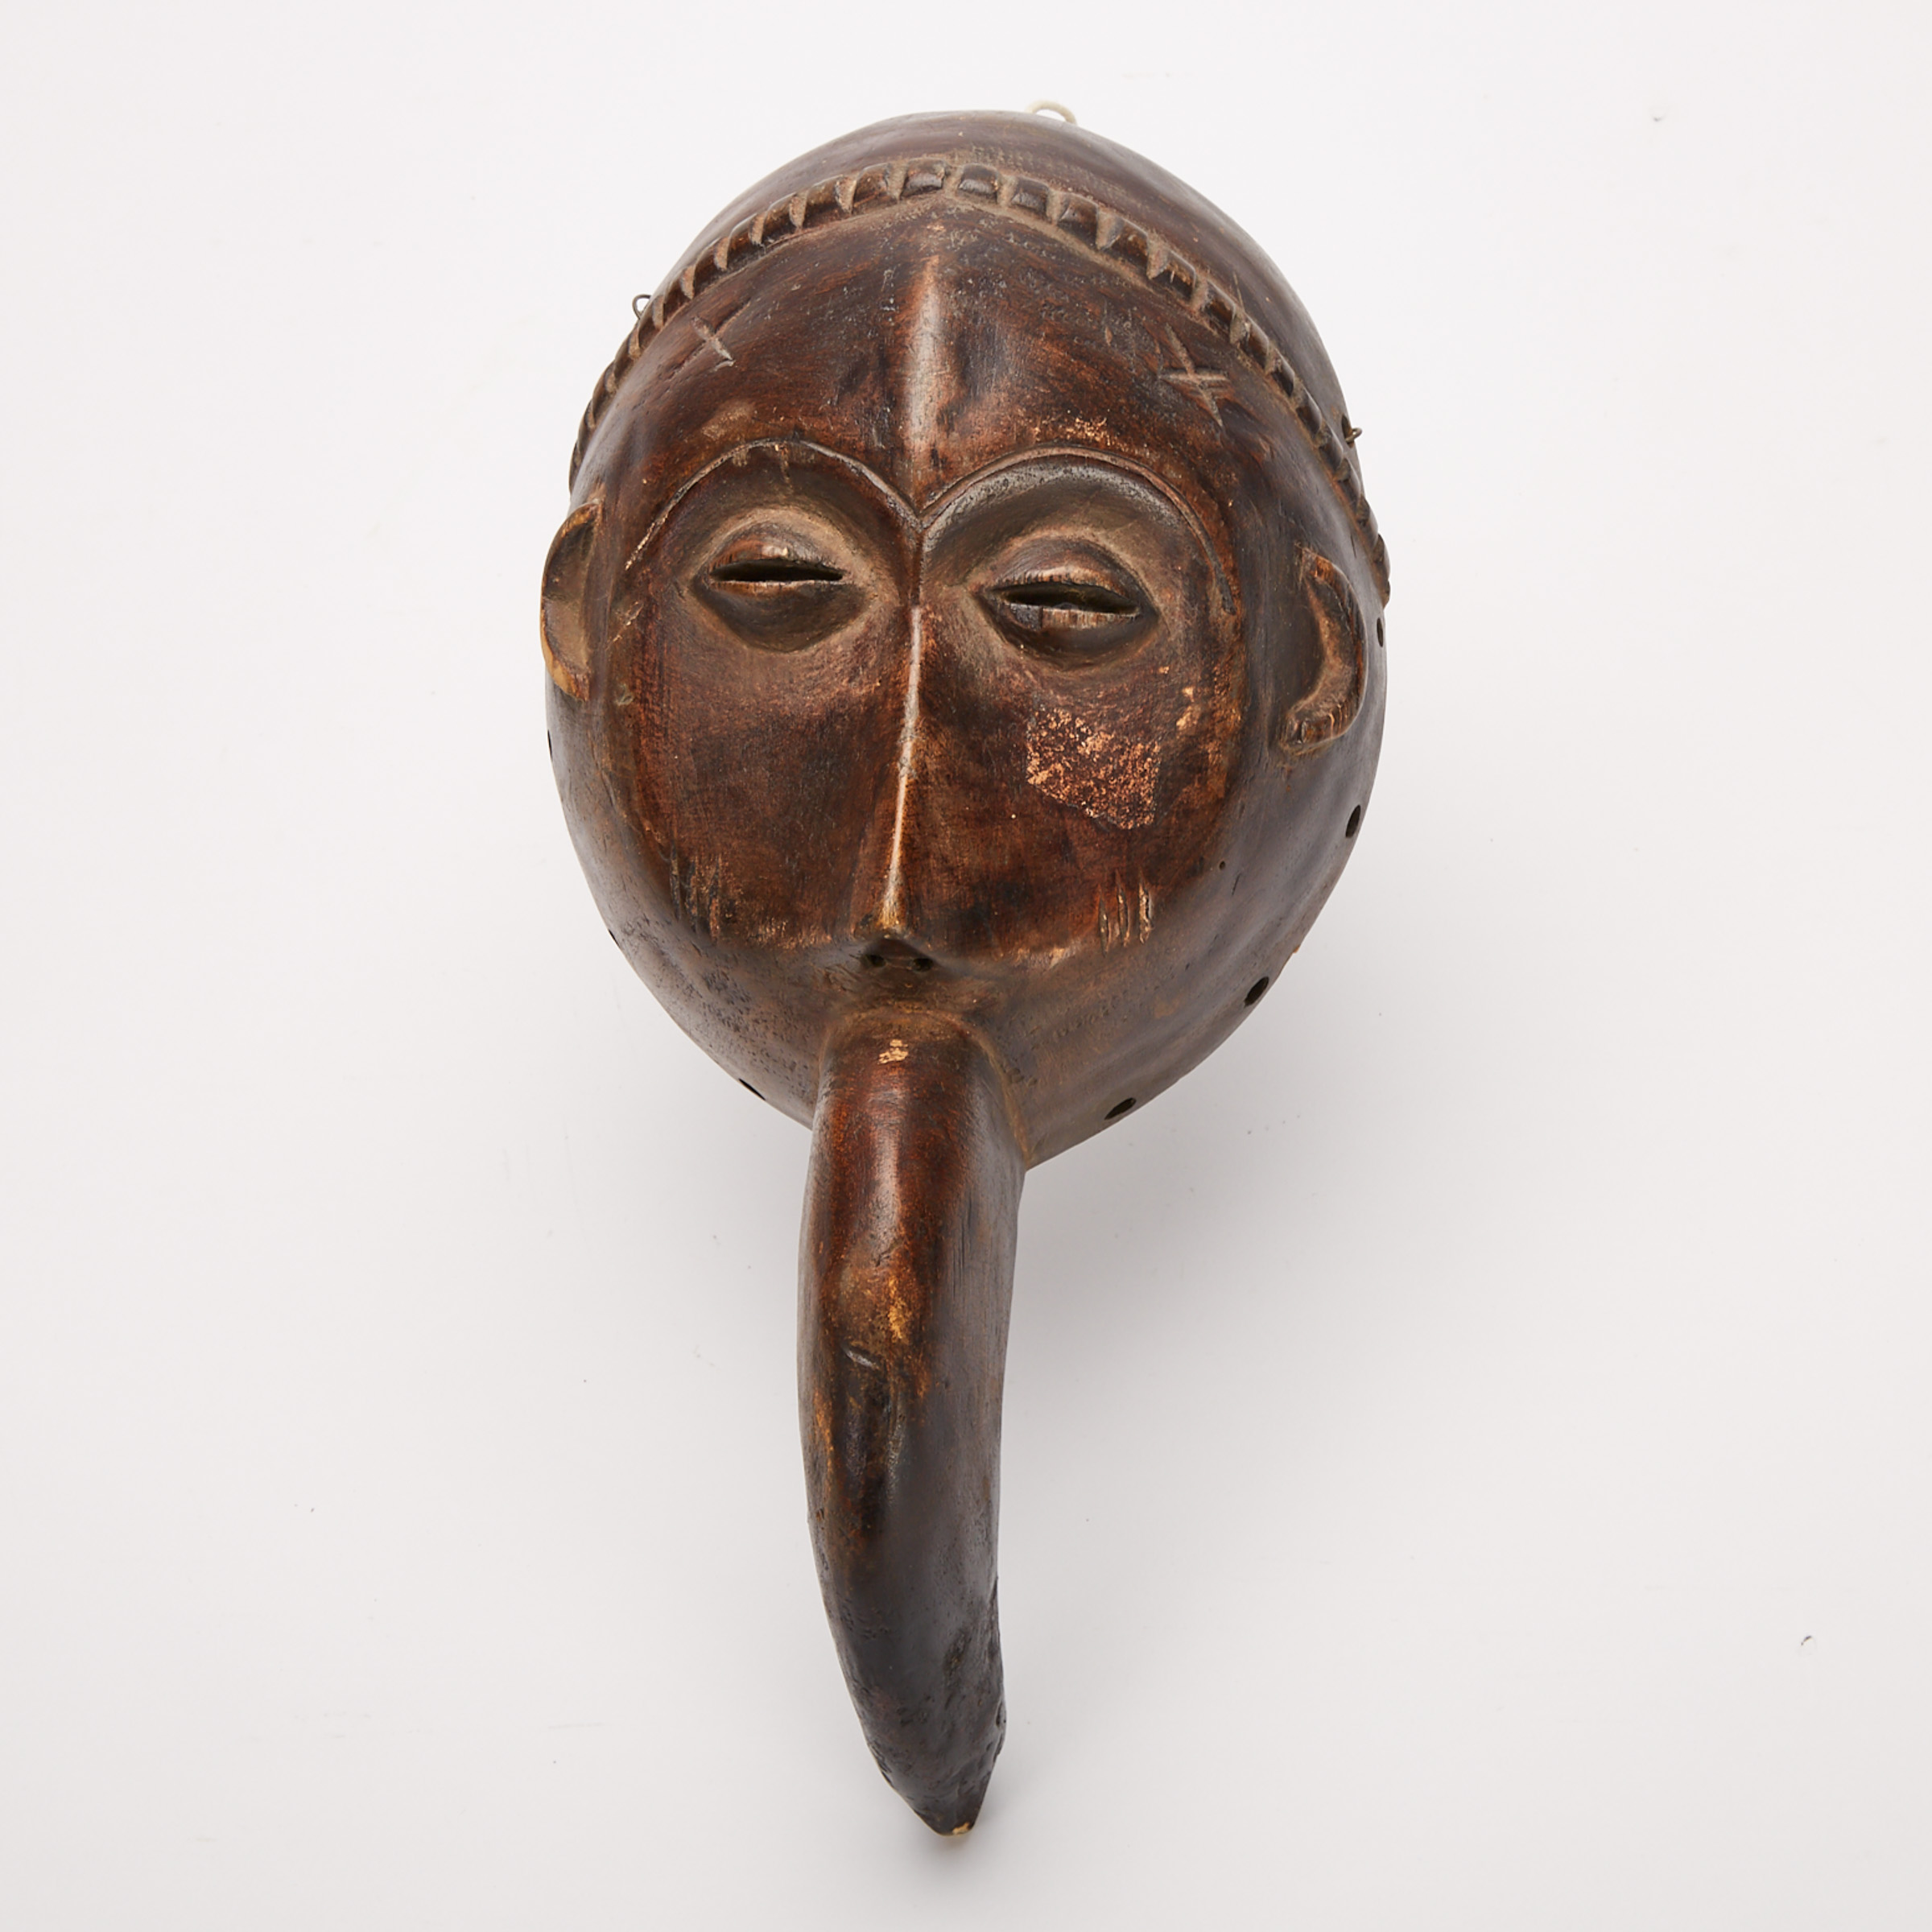 Anthropo-zoomorphic Mask, possibly Dan or Baule, West Africa